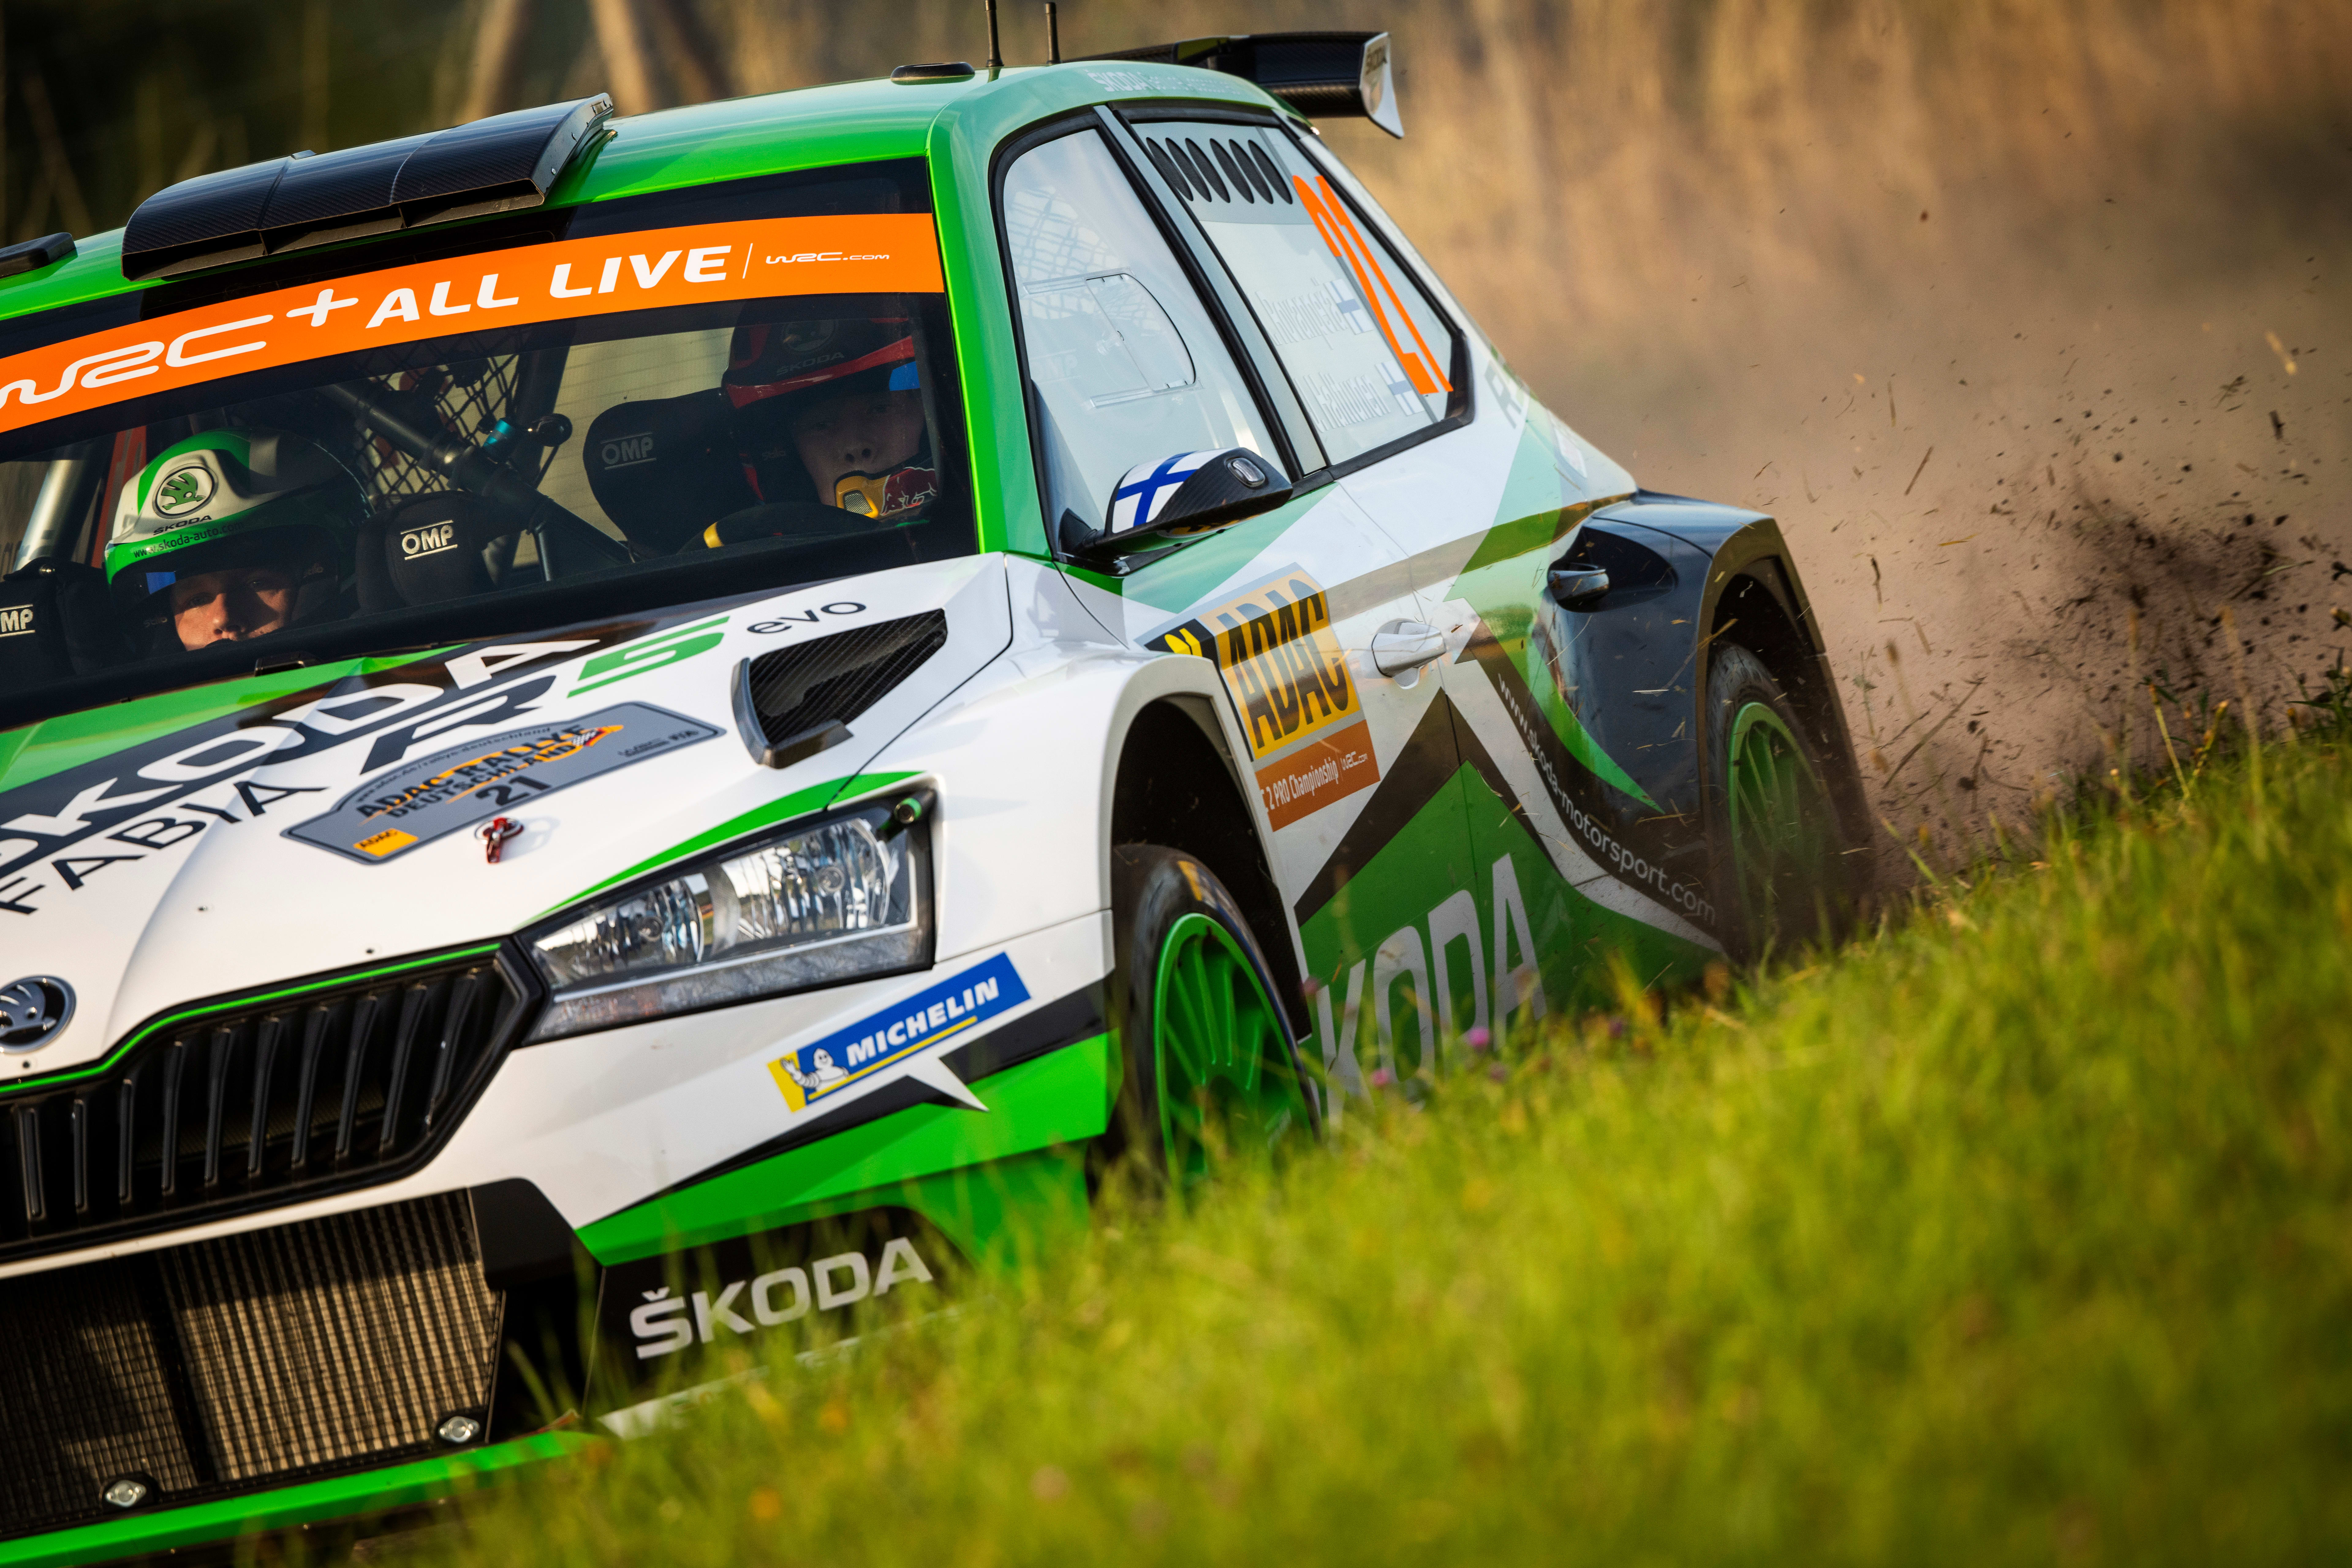 Kalle Rovanperä is 18: How Do You Become Successful in WRC 2 Before You're  Adult? - Škoda Motorsport